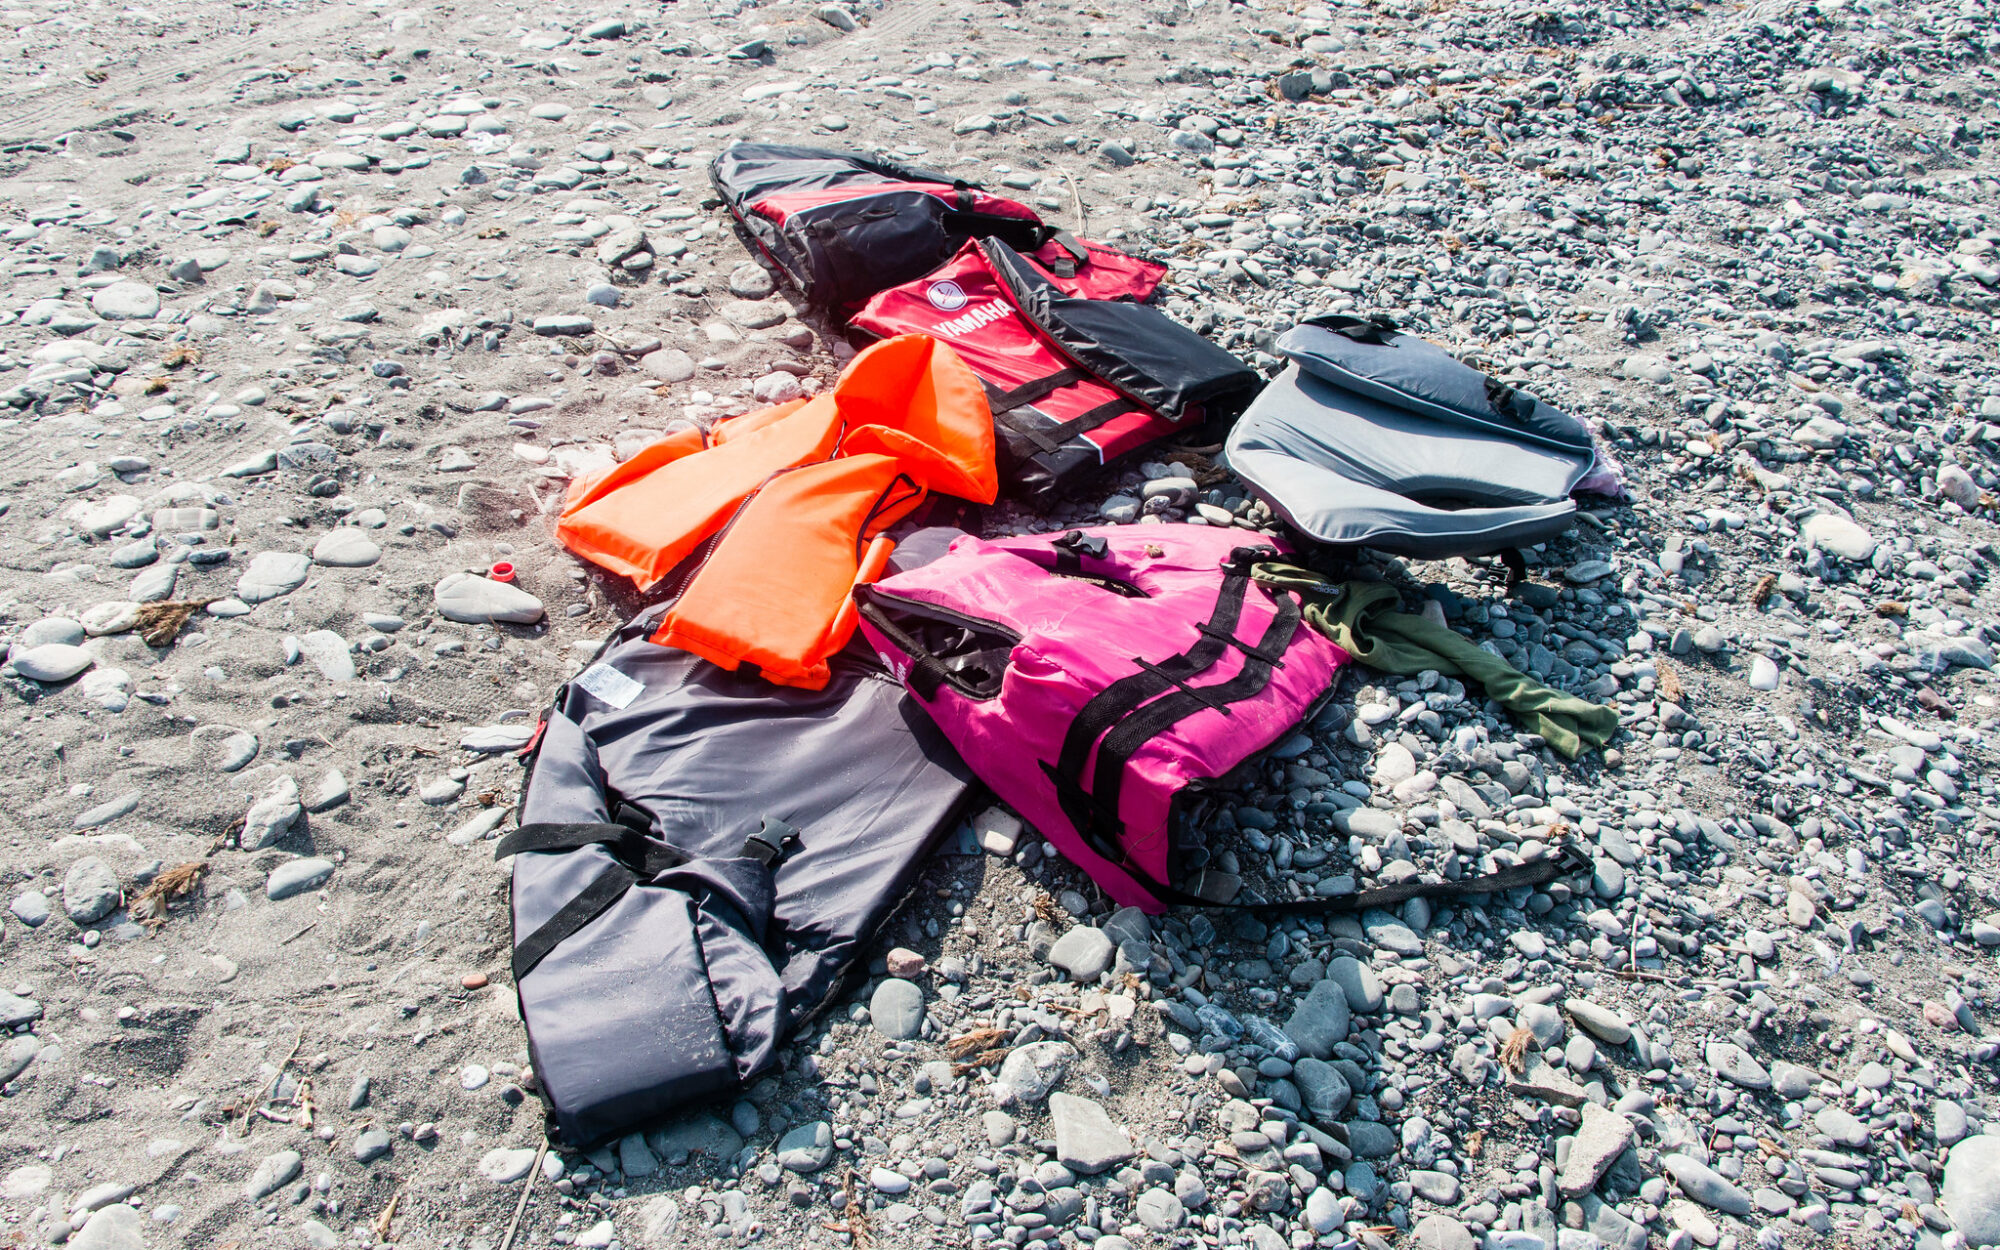 Six lifejackets lie scattered on a beach